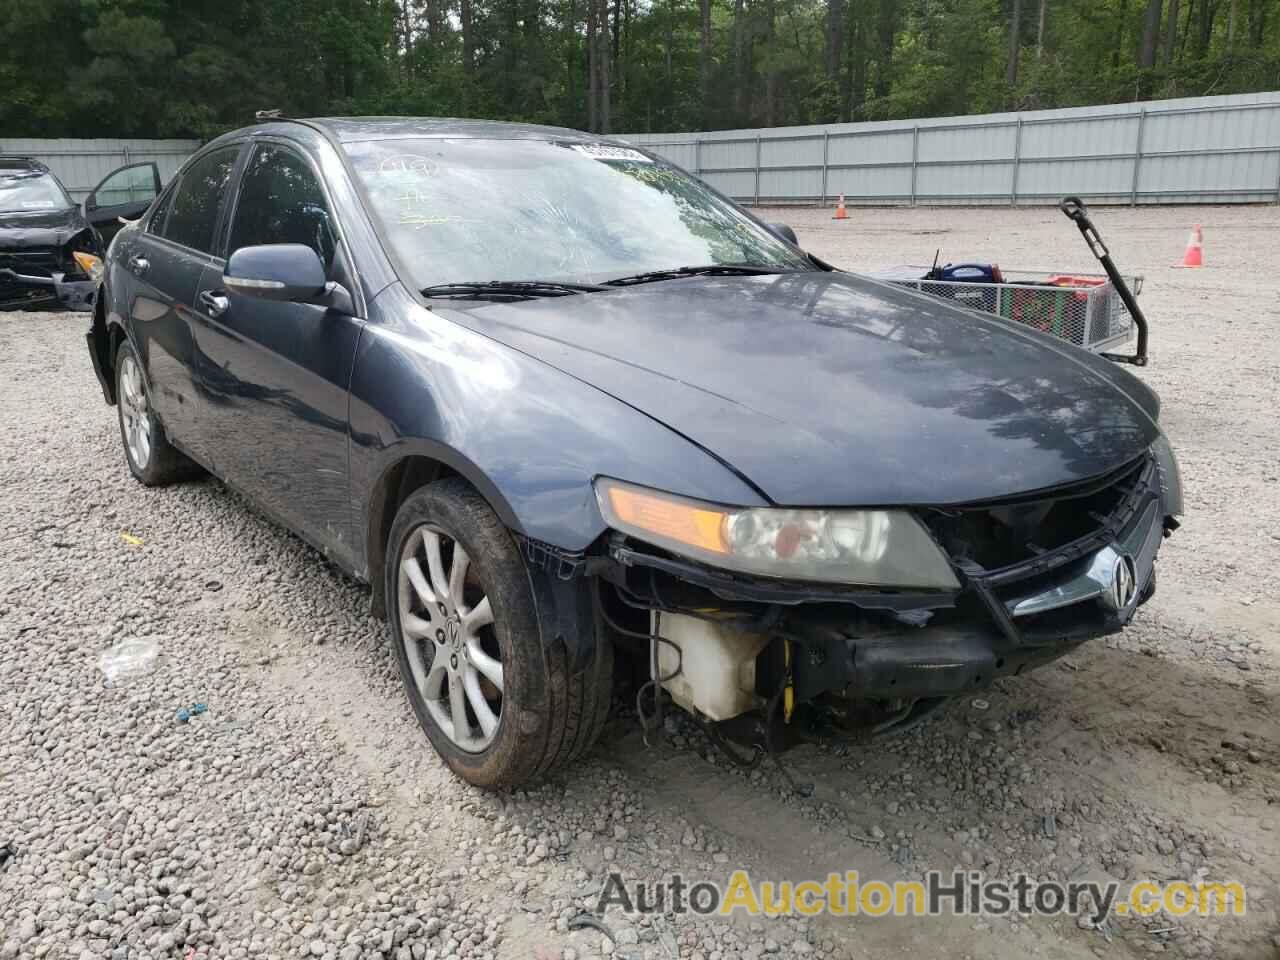 2008 ACURA TSX, JH4CL96838C001769